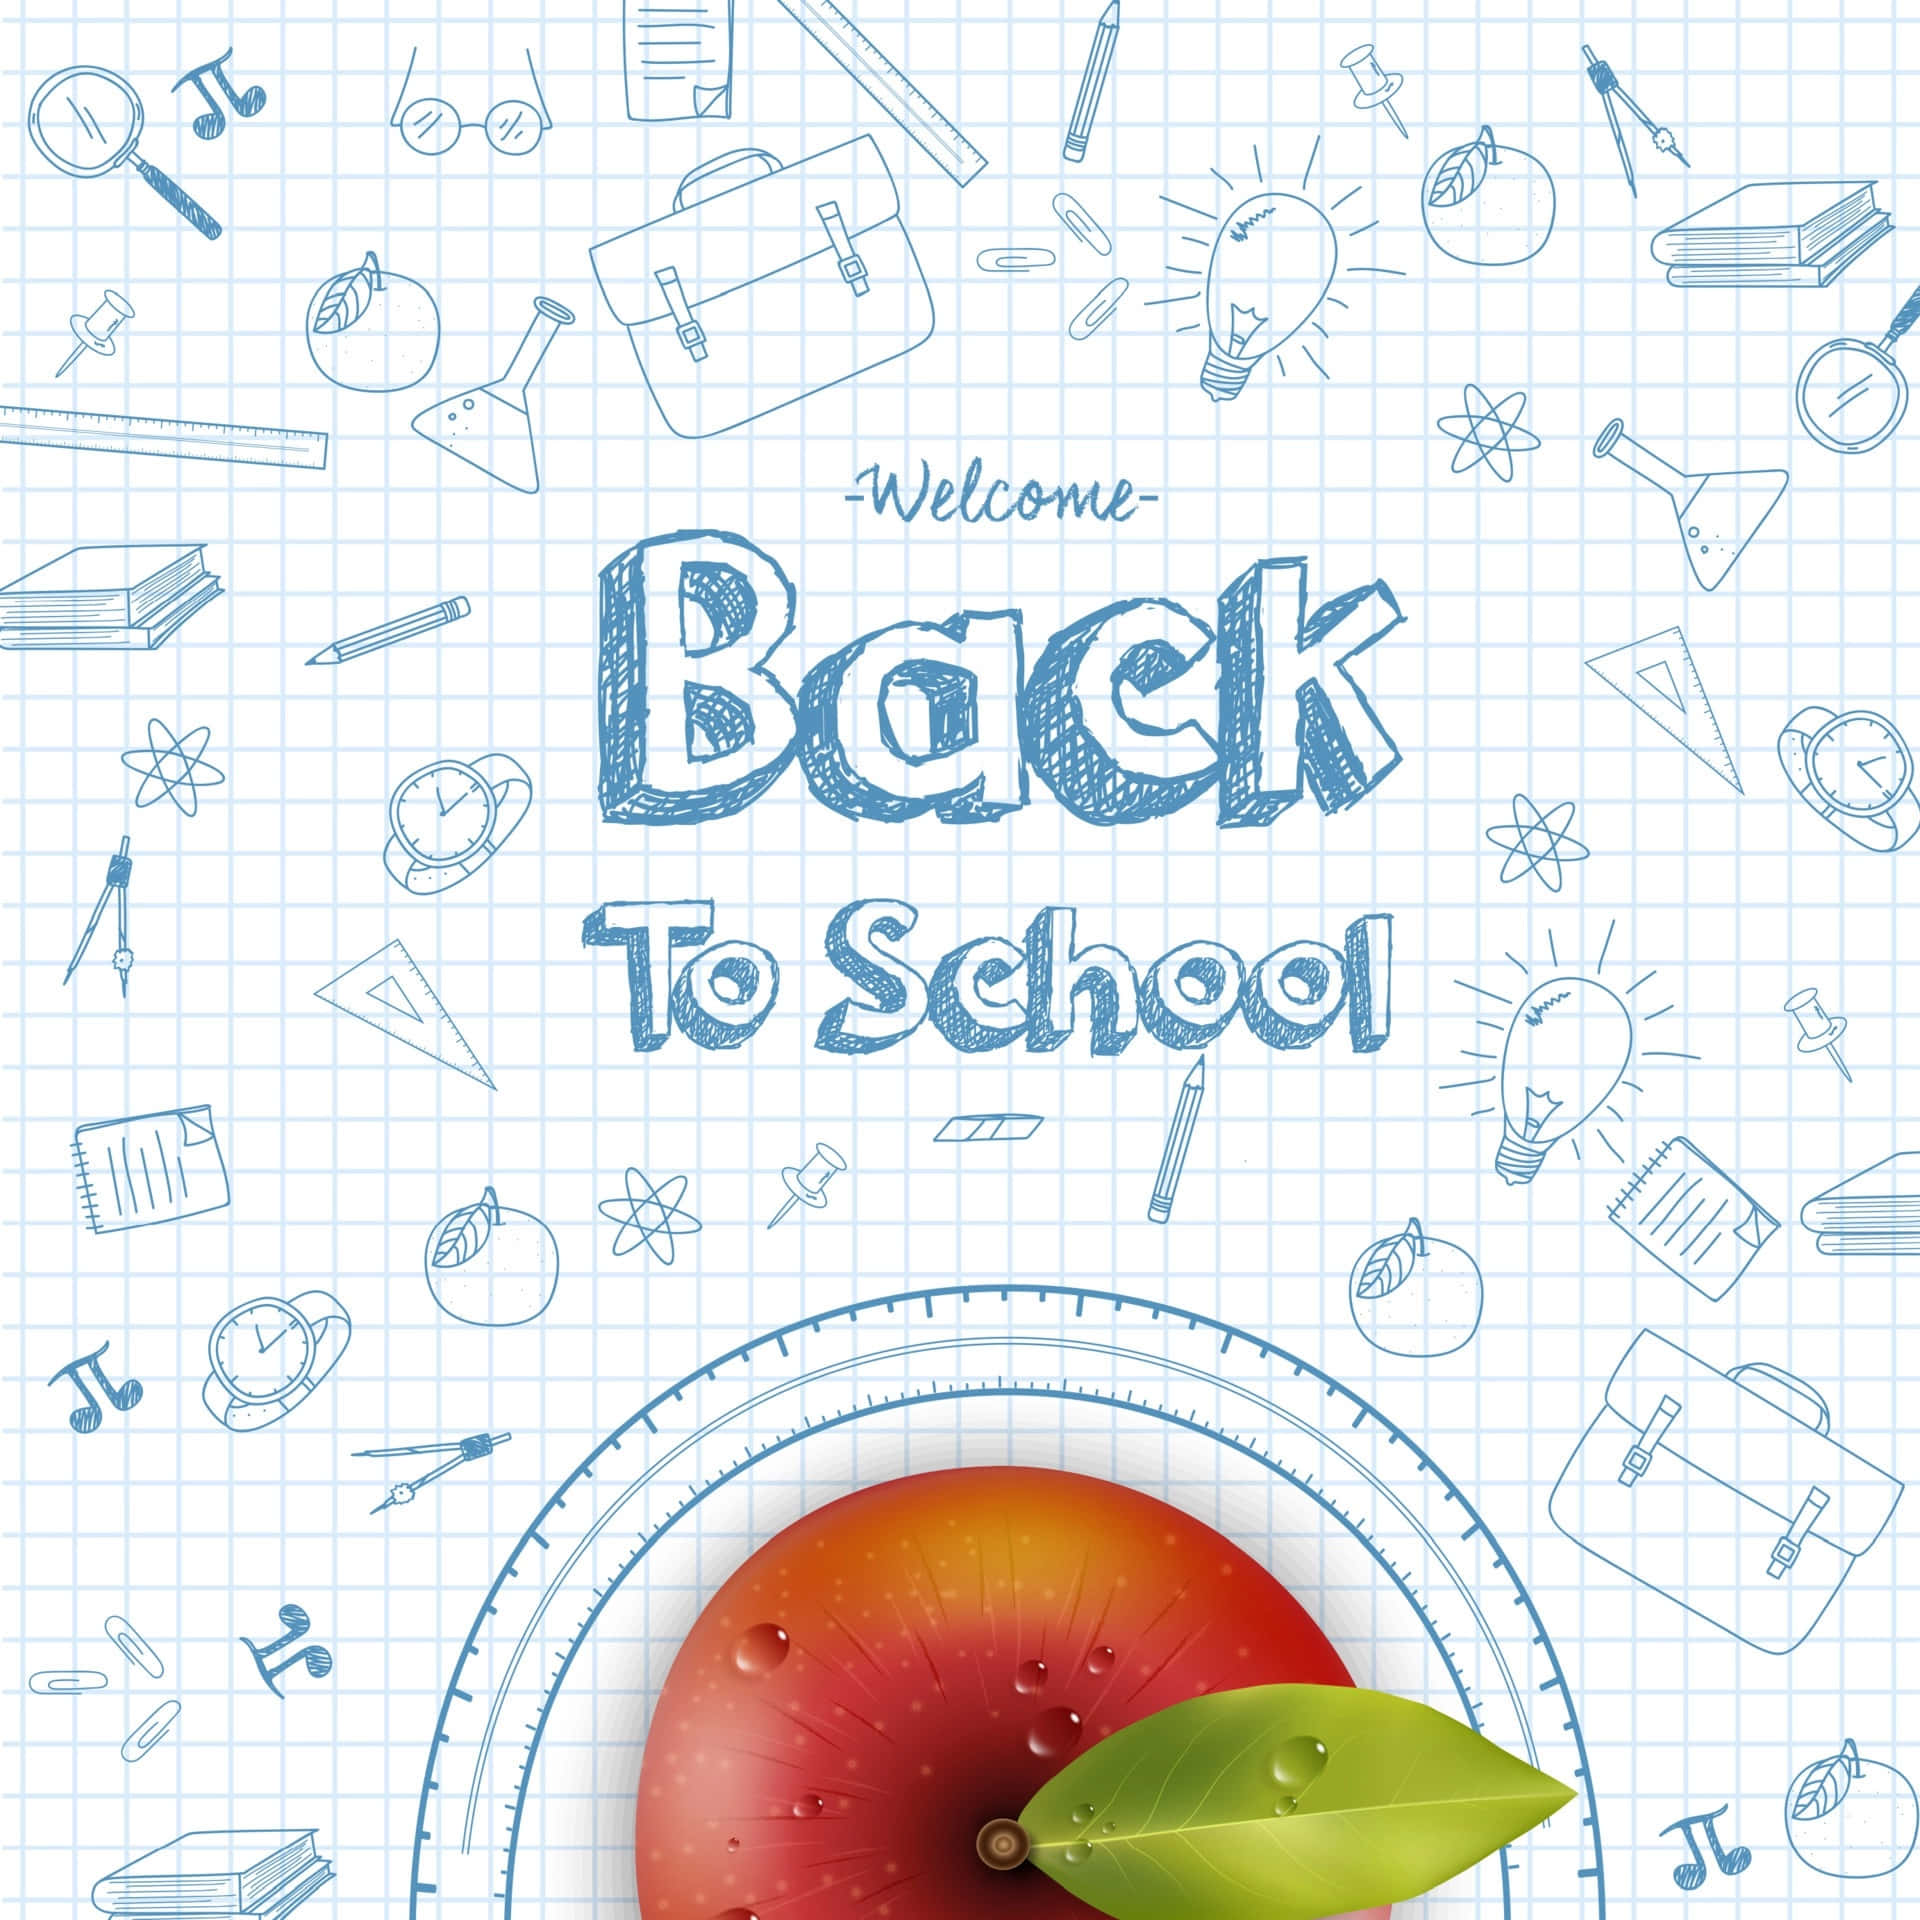 A Back To School Background With An Apple And Pencils